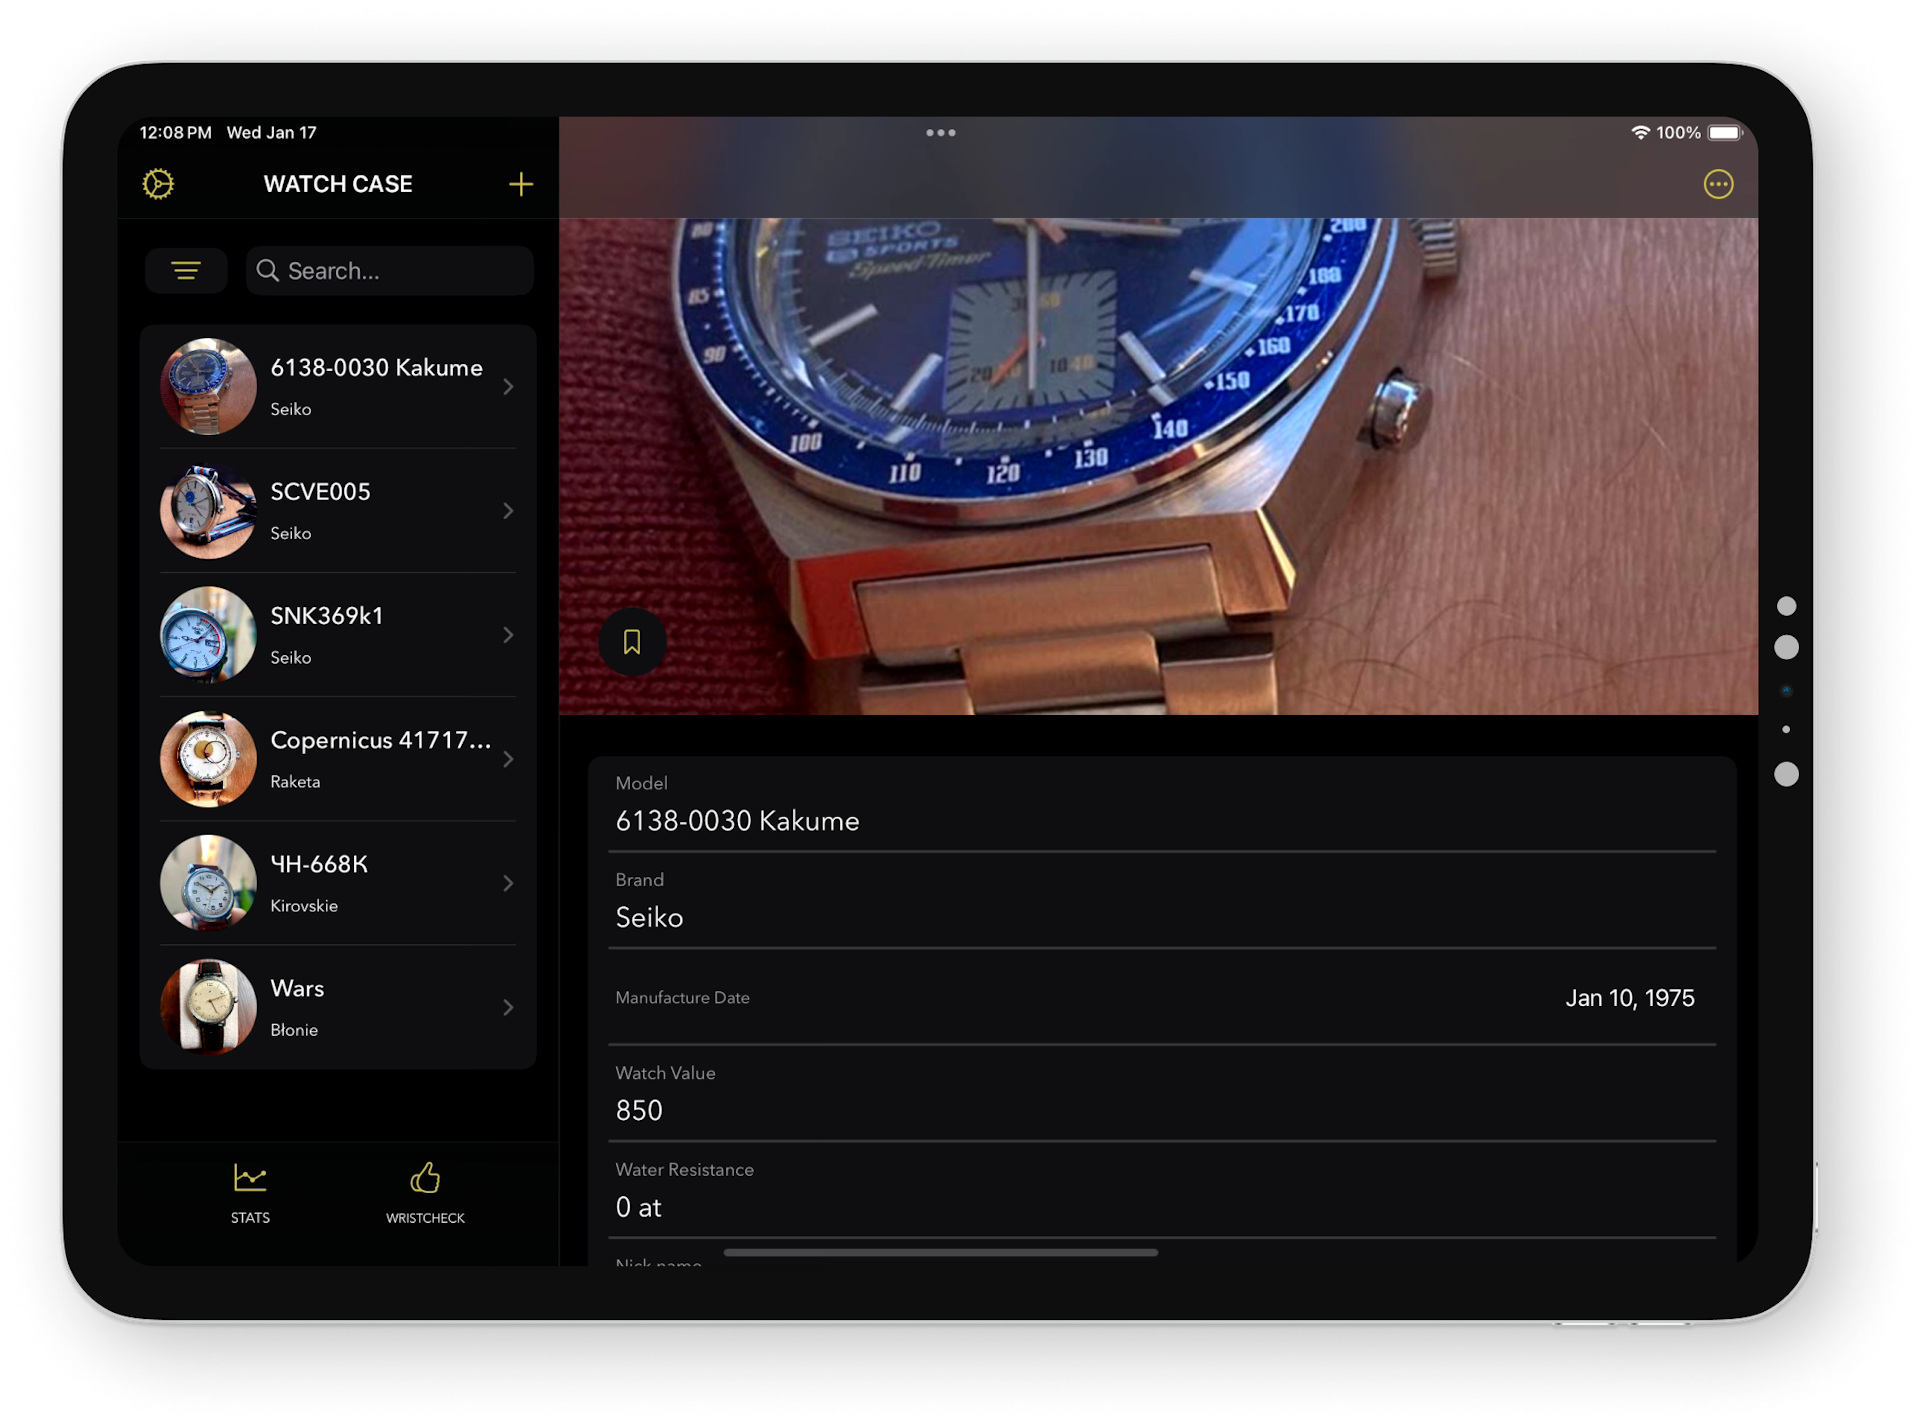 The Watch Case App, showing options to set up your blog